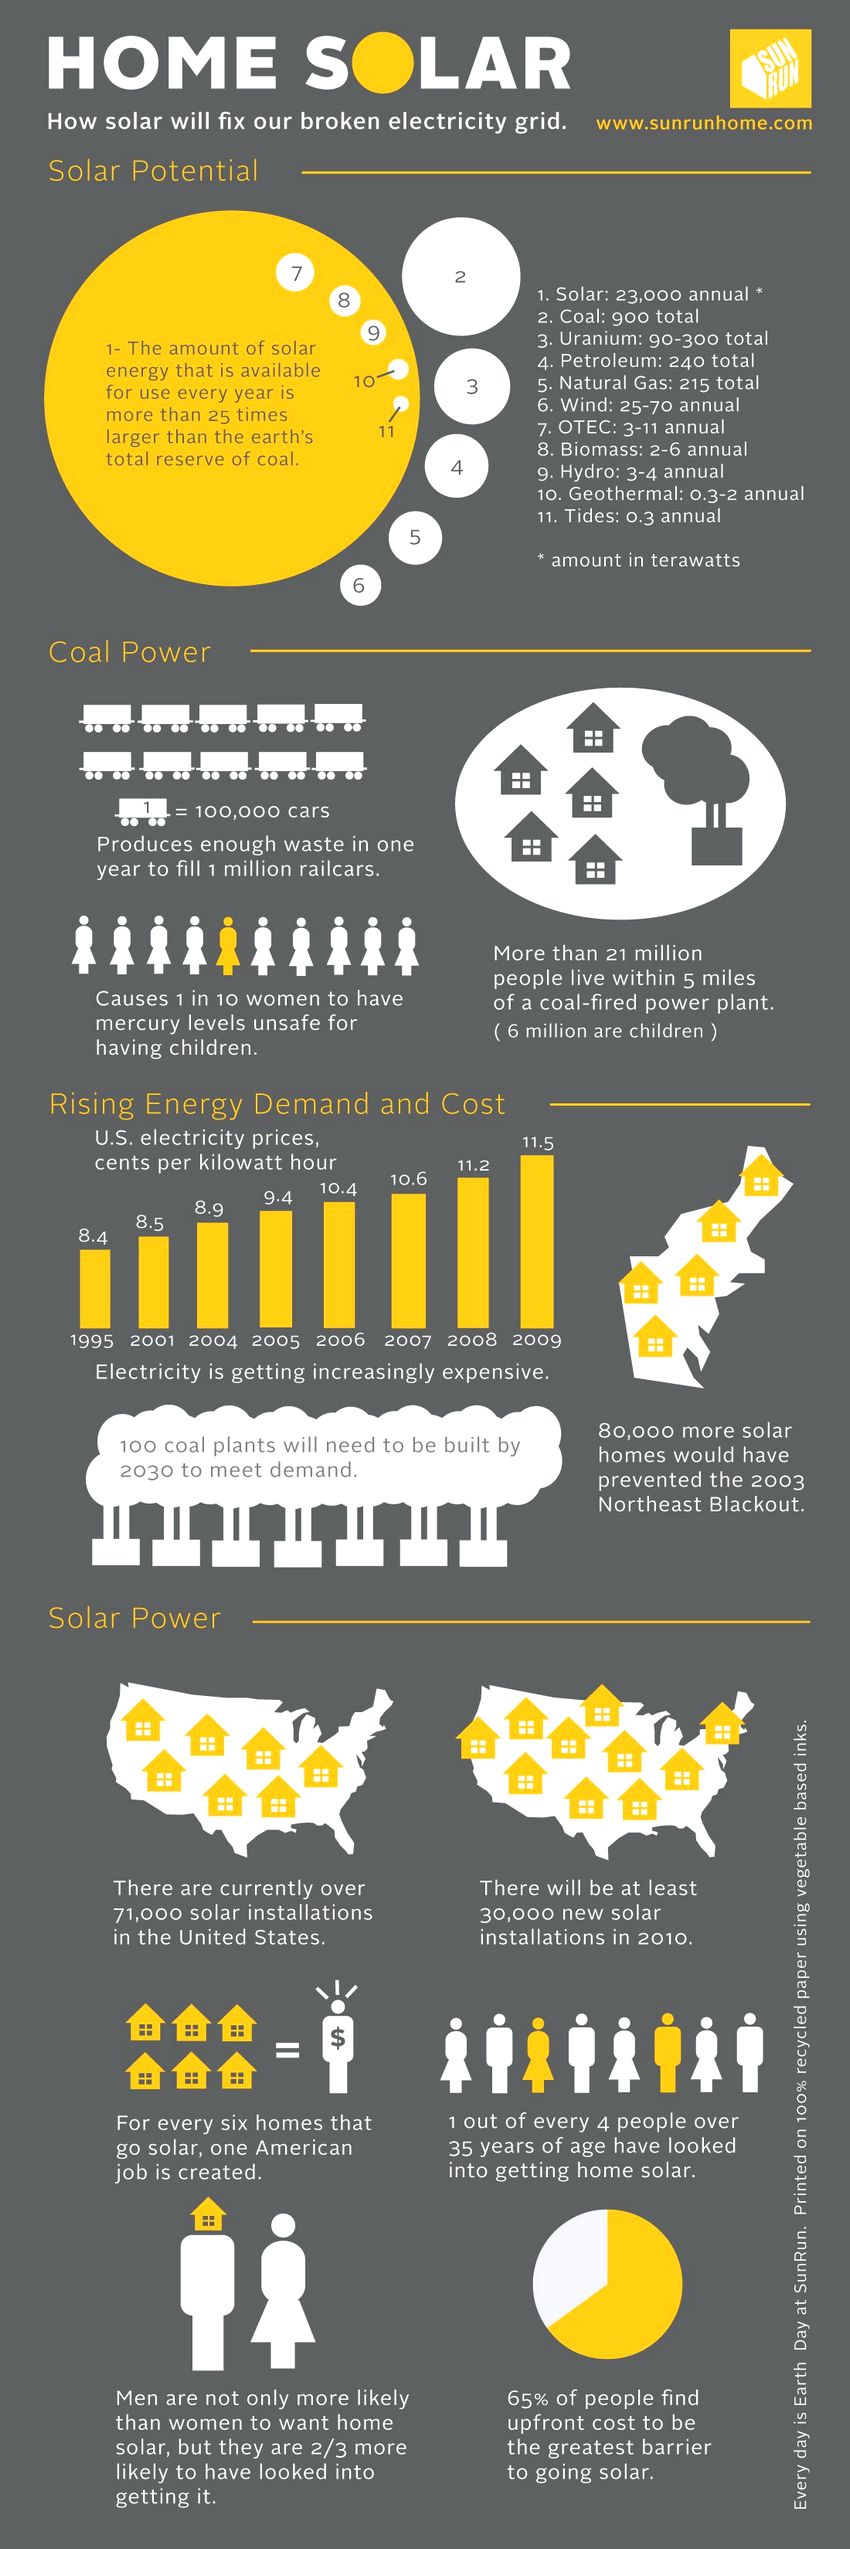 infographic about solar energy